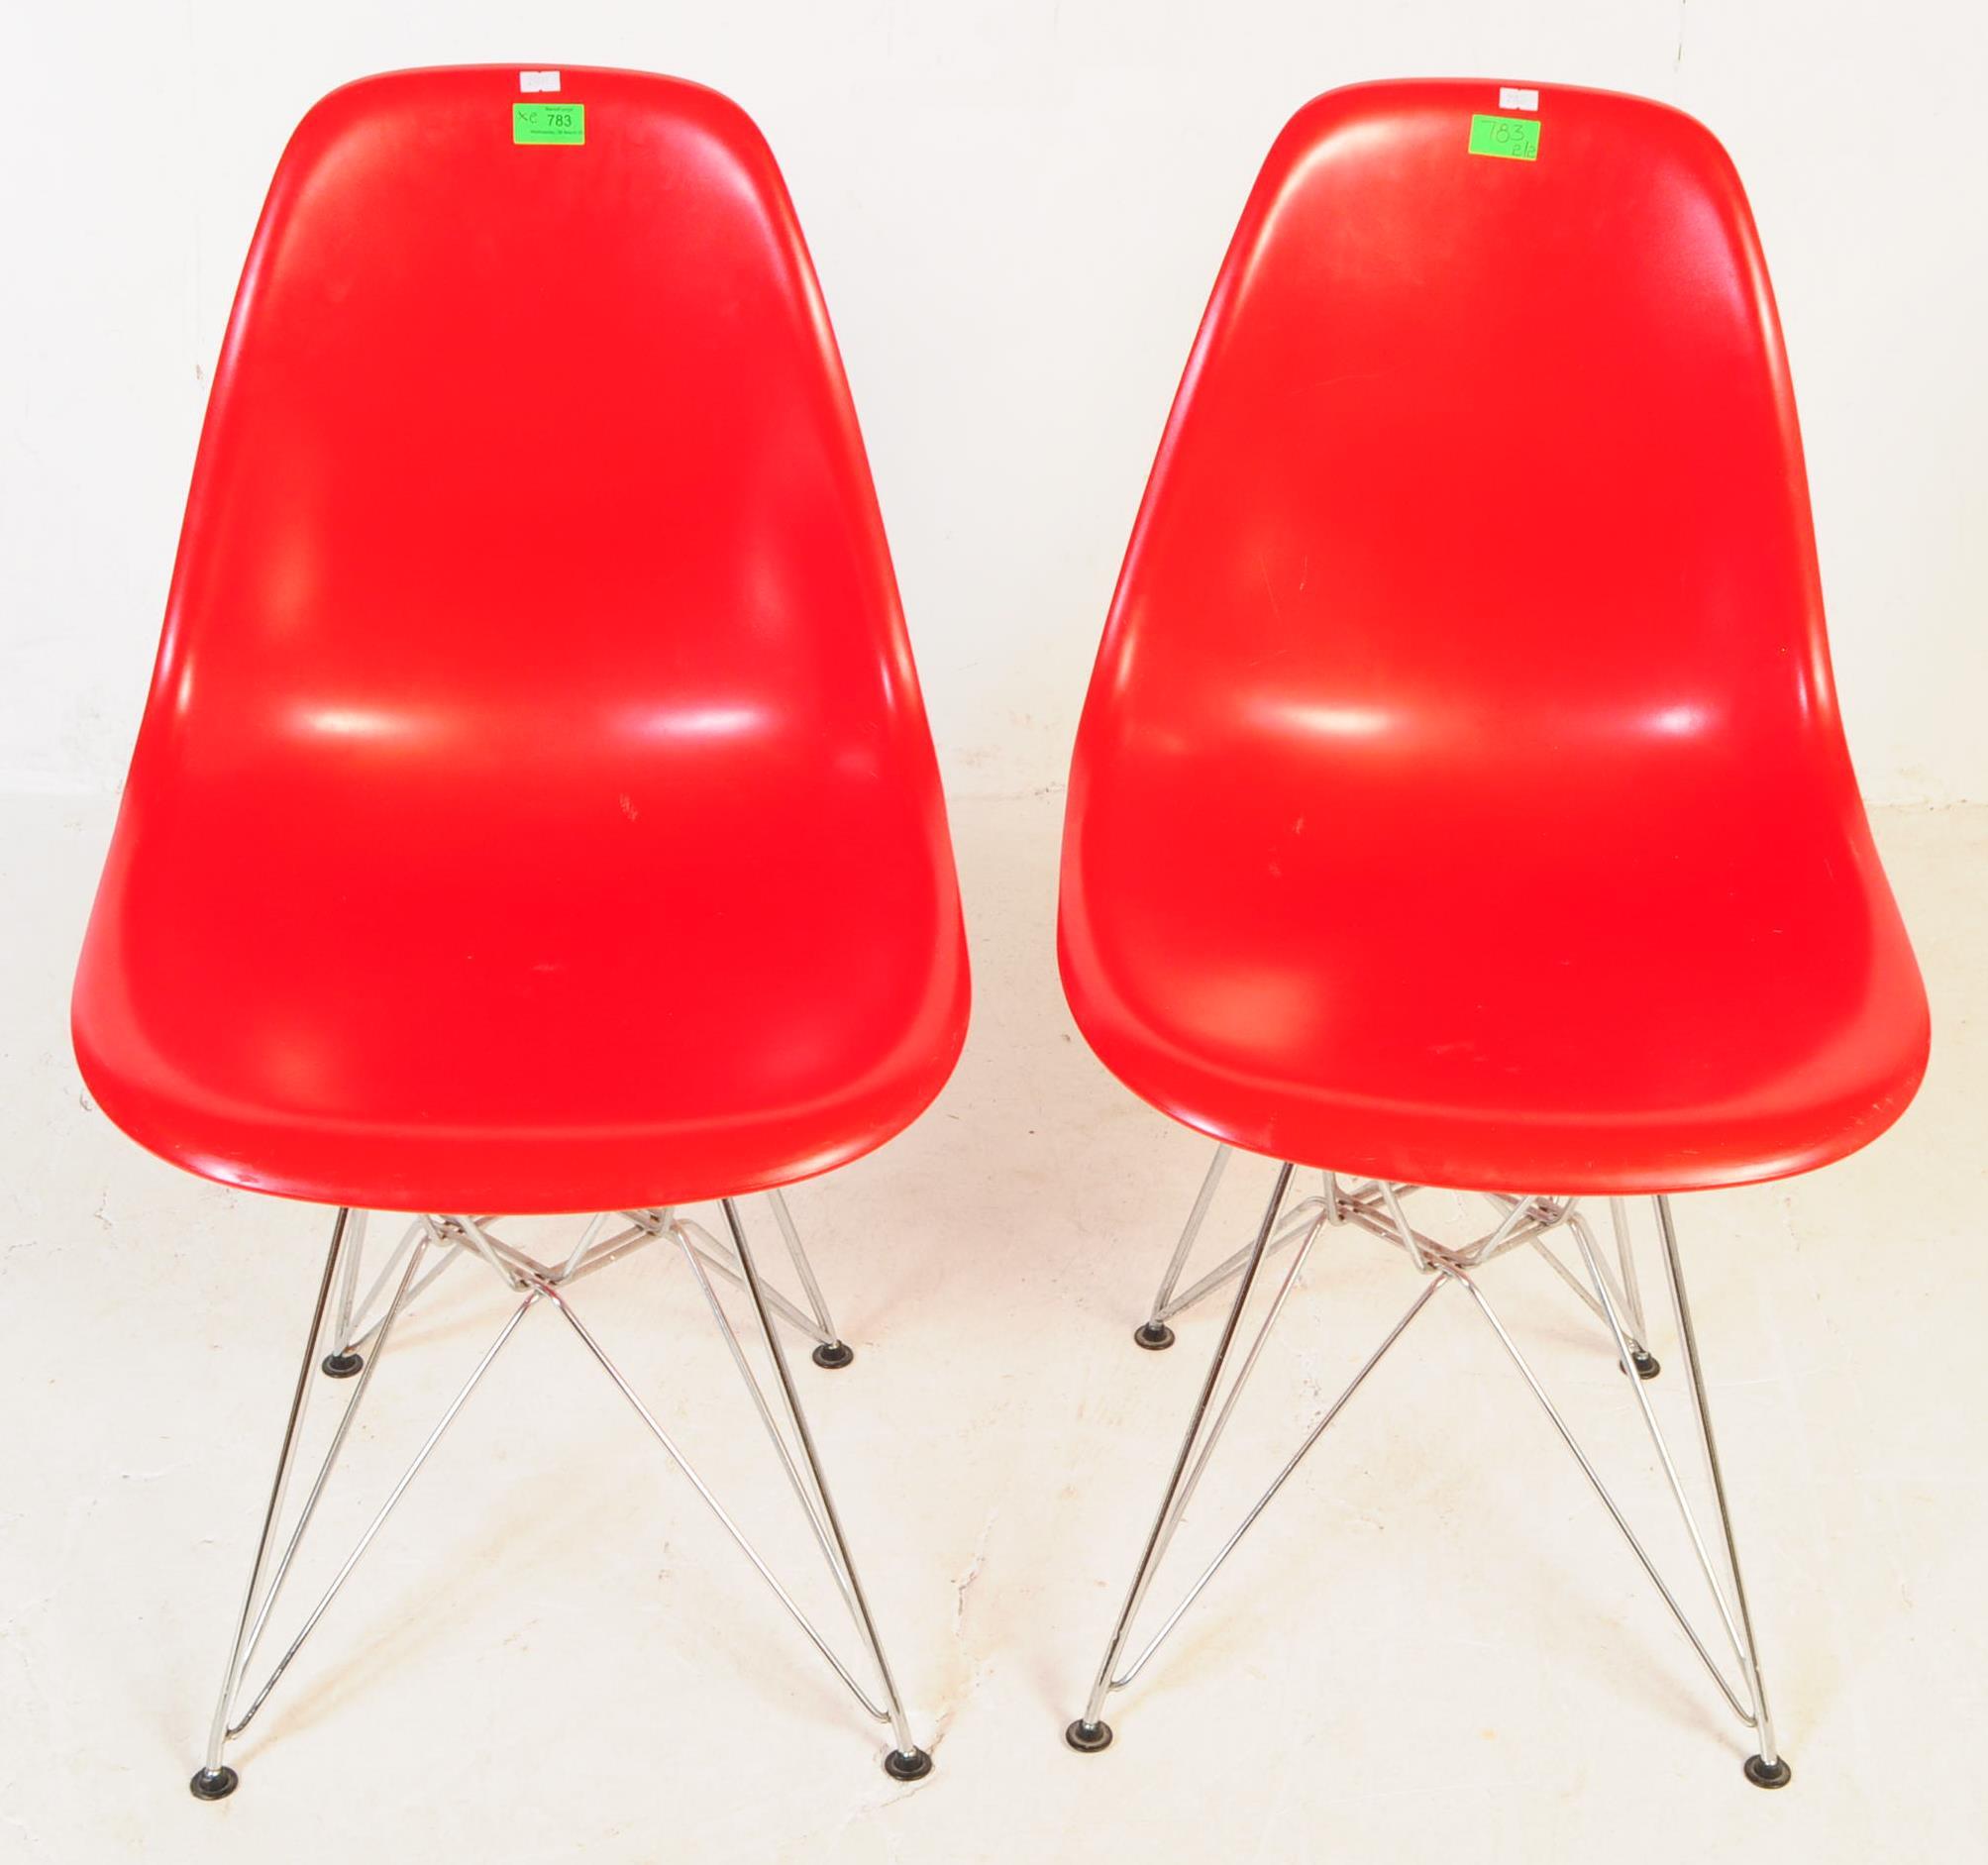 MATCHING PAIR OF CONTEMPORARY DSW STYLE CHAIRS - Image 5 of 5